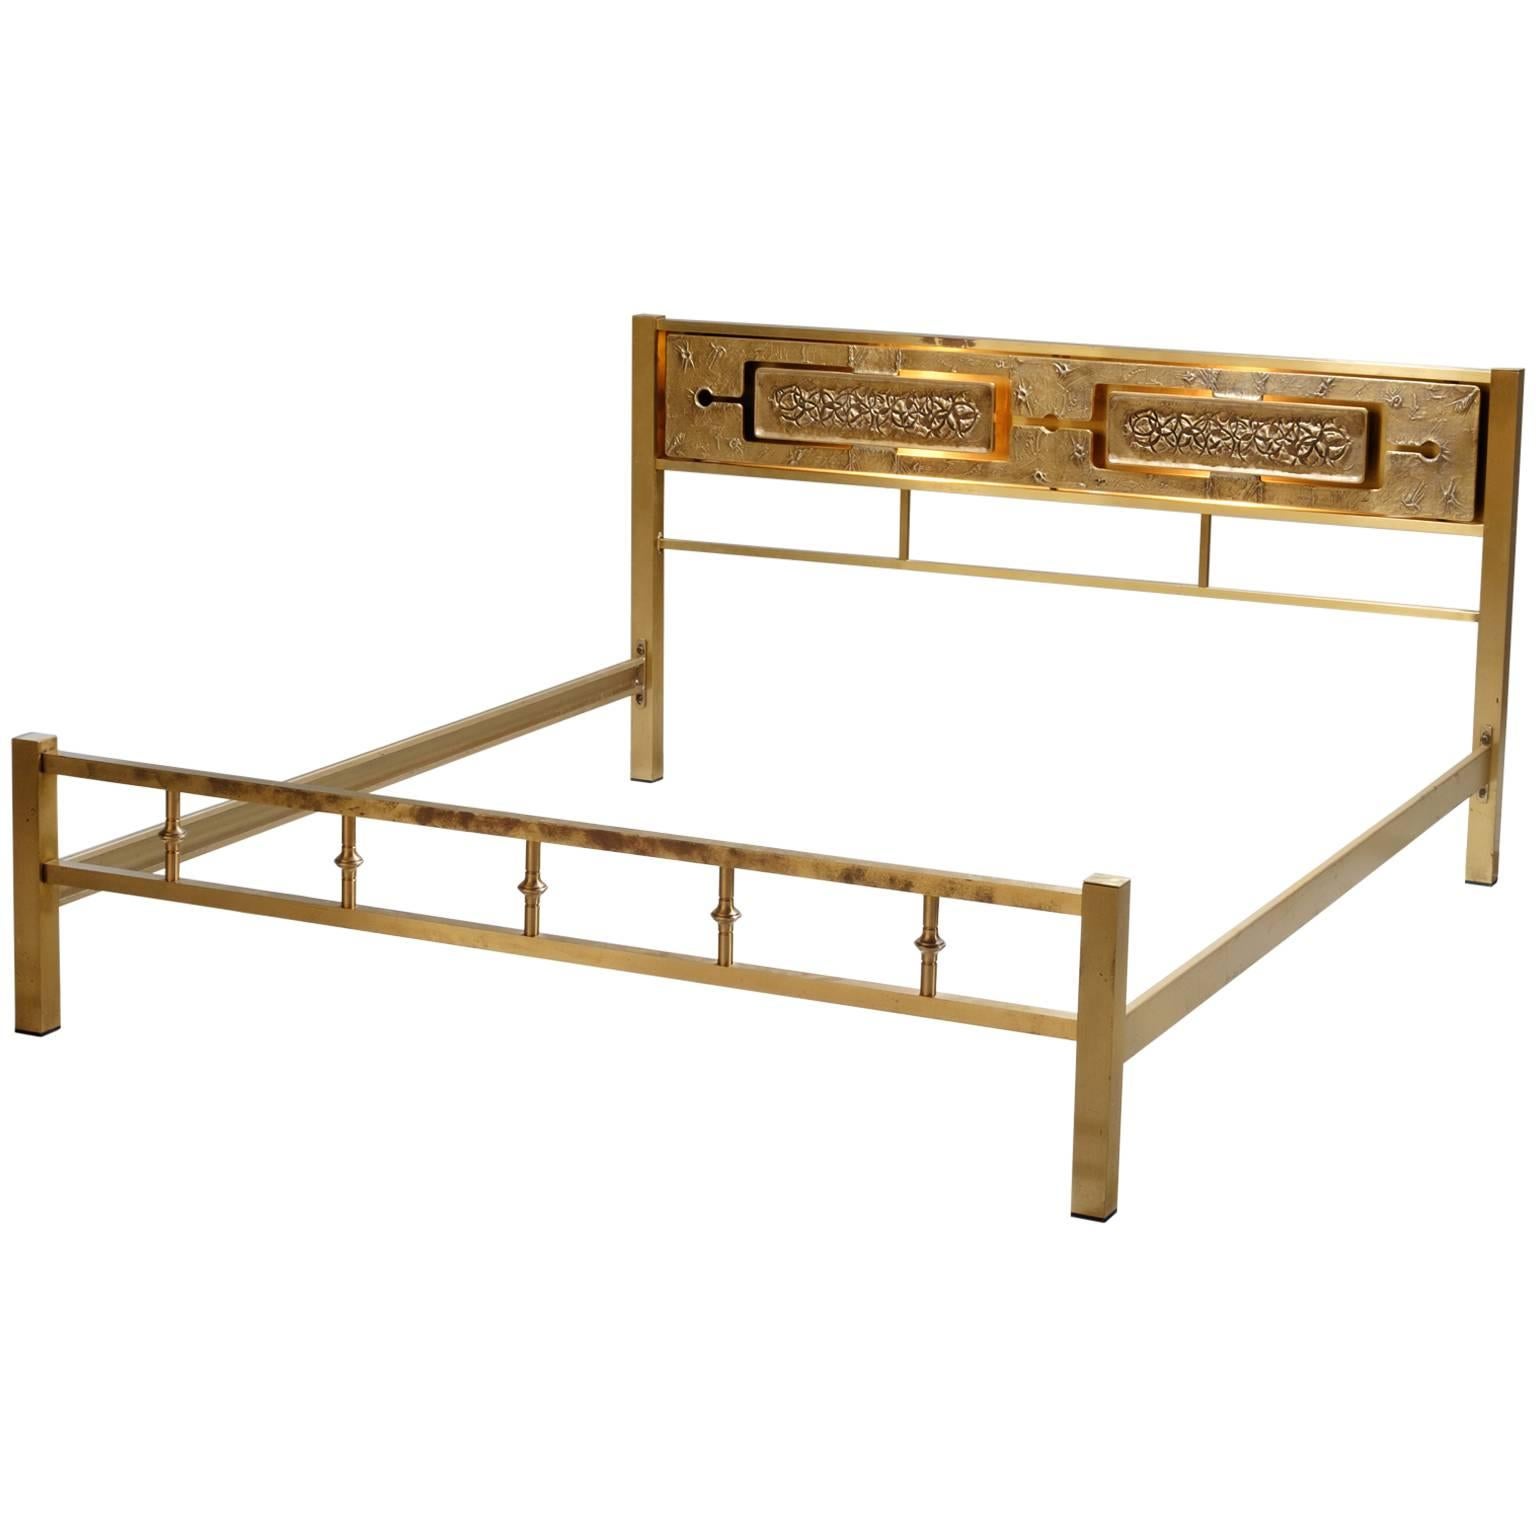 Illuminated Solid Brass King-Size Bed